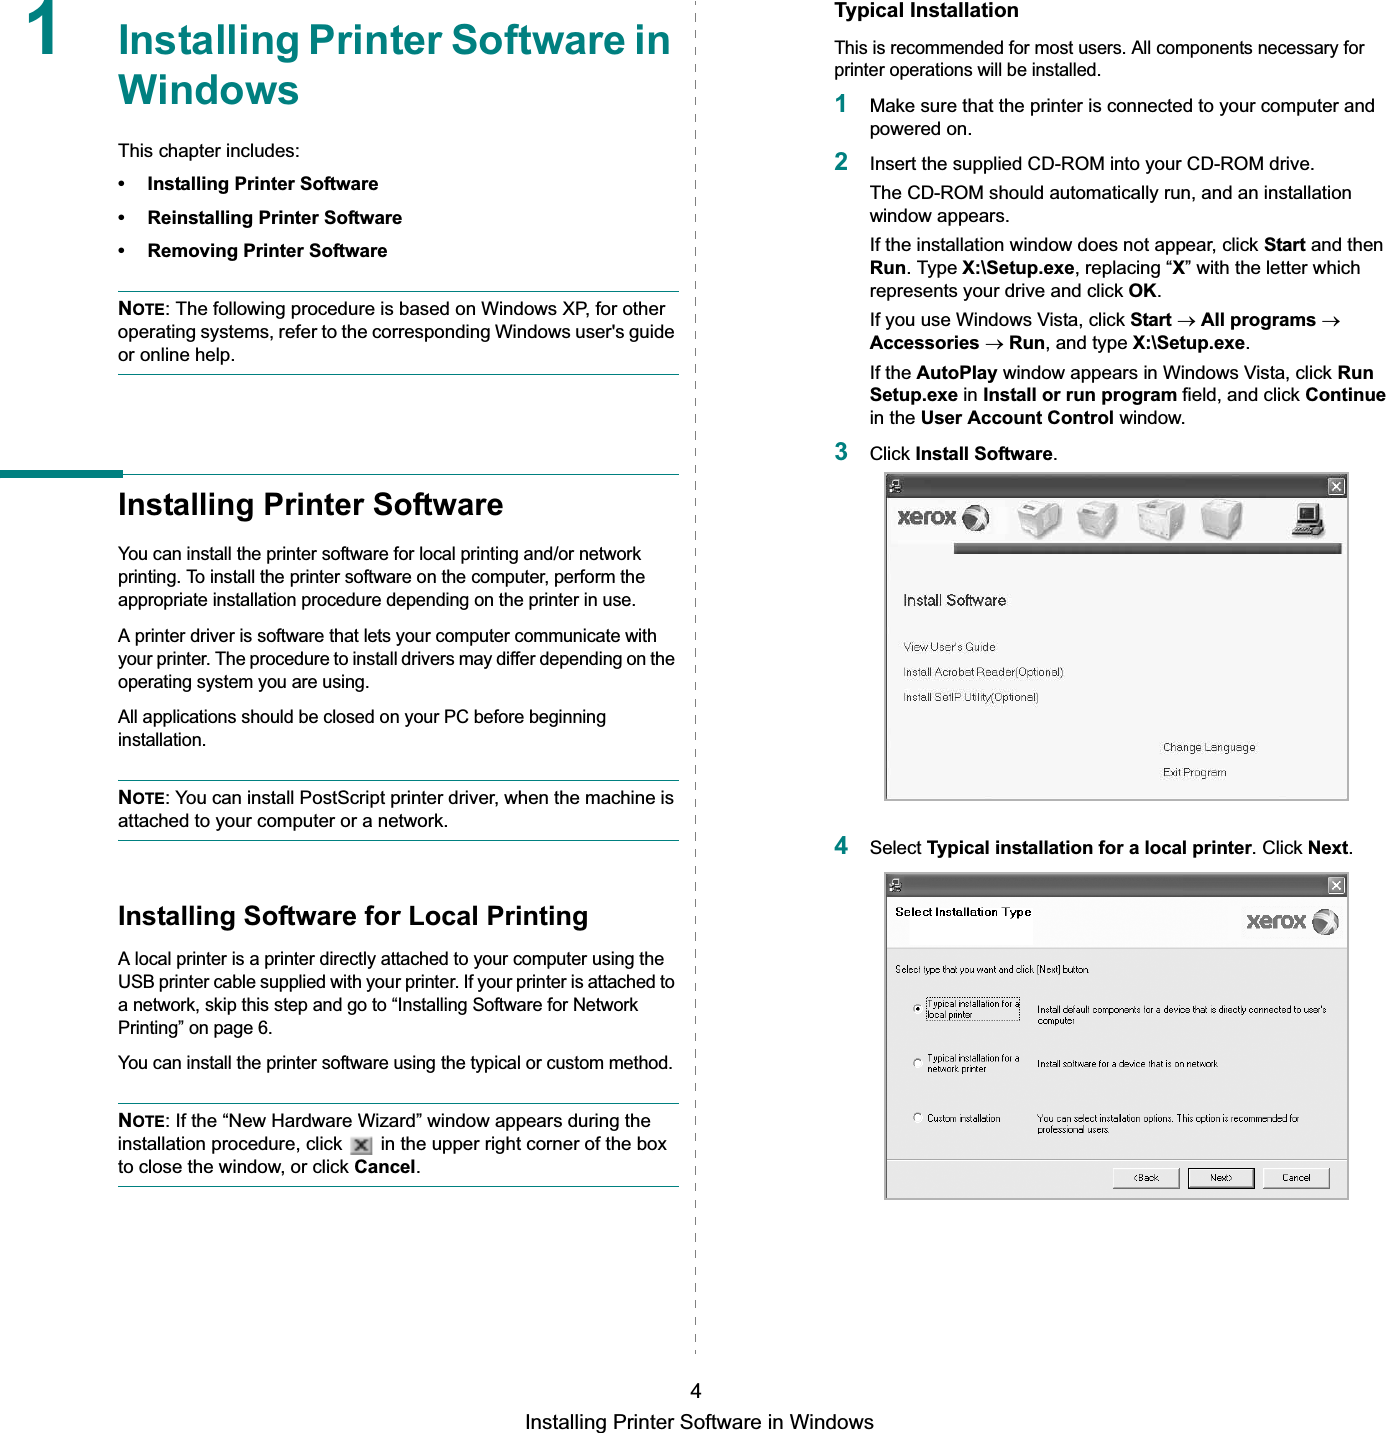 Installing Printer Software in Windows41Installing Printer Software in WindowsThis chapter includes:• Installing Printer Software• Reinstalling Printer Software• Removing Printer SoftwareNOTE: The following procedure is based on Windows XP, for other operating systems, refer to the corresponding Windows user&apos;s guide or online help.Installing Printer SoftwareYou can install the printer software for local printing and/or network printing. To install the printer software on the computer, perform the appropriate installation procedure depending on the printer in use.A printer driver is software that lets your computer communicate with your printer. The procedure to install drivers may differ depending on the operating system you are using.All applications should be closed on your PC before beginning installation. NOTE: You can install PostScript printer driver, when the machine is attached to your computer or a network. Installing Software for Local PrintingA local printer is a printer directly attached to your computer using the USB printer cable supplied with your printer. If your printer is attached to a network, skip this step and go to “Installing Software for Network Printing” on page 6.You can install the printer software using the typical or custom method.NOTE: If the “New Hardware Wizard” window appears during the installation procedure, click   in the upper right corner of the box to close the window, or click Cancel.Typical InstallationThis is recommended for most users. All components necessary for printer operations will be installed.1Make sure that the printer is connected to your computer and powered on.2Insert the supplied CD-ROM into your CD-ROM drive.The CD-ROM should automatically run, and an installation window appears.If the installation window does not appear, click Start and then Run. Type X:\Setup.exe, replacing “X” with the letter which represents your drive and click OK.If you use Windows Vista, click Start oAll programs oAccessories oRun, and type X:\Setup.exe.If the AutoPlay window appears in Windows Vista, click RunSetup.exe in Install or run program field, and click Continuein the User Account Control window.3Click Install Software.4Select Typical installation for a local printer. Click Next.